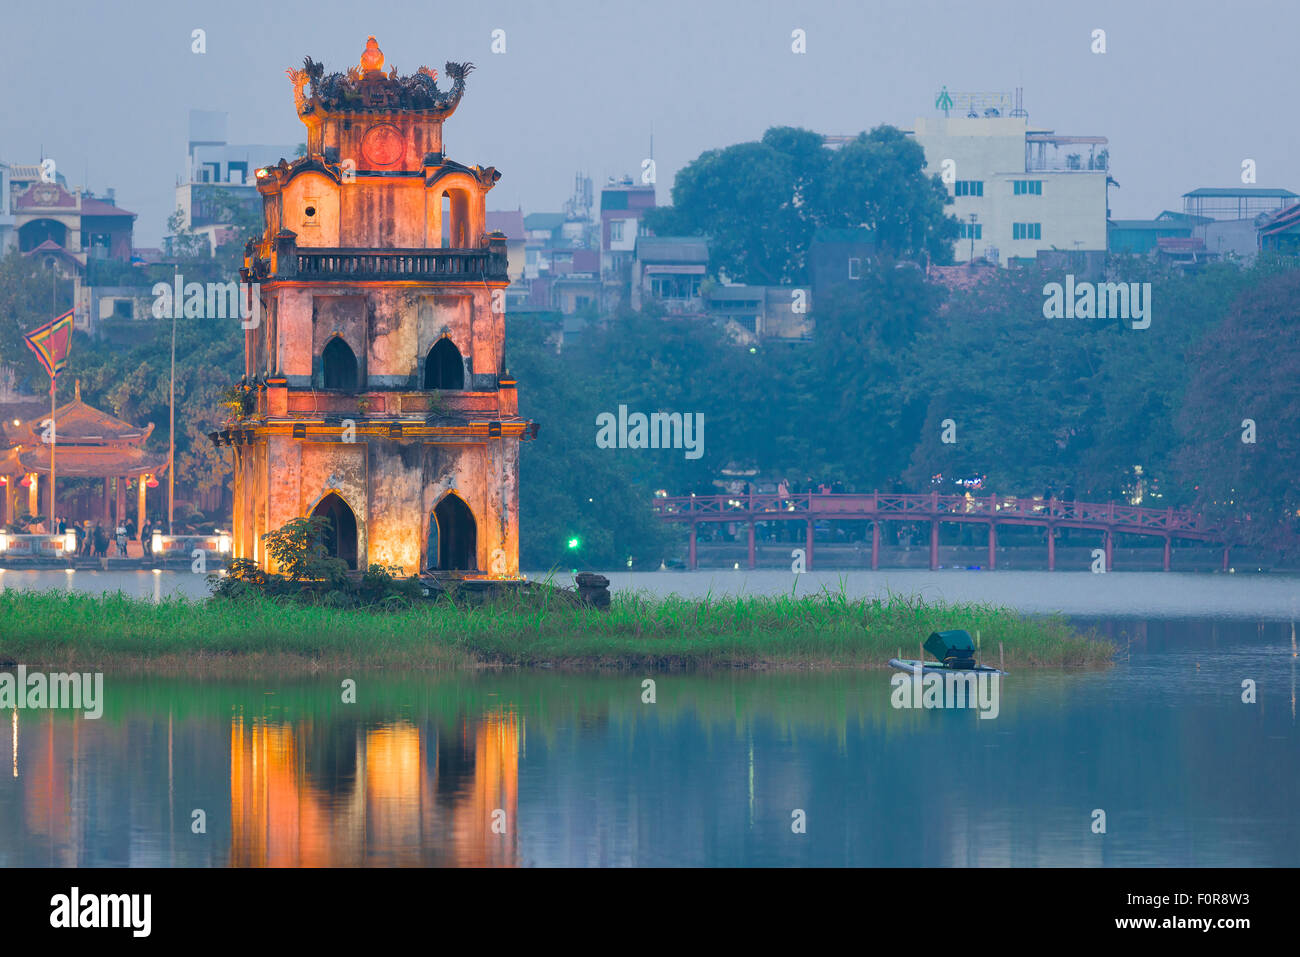 Hanoi Turtle Tower, view at dusk of the 19th century pavilion known as Turtle Tower sited in Hoan Kiem Lake in the center of Hanoi, Vietnam. Stock Photo